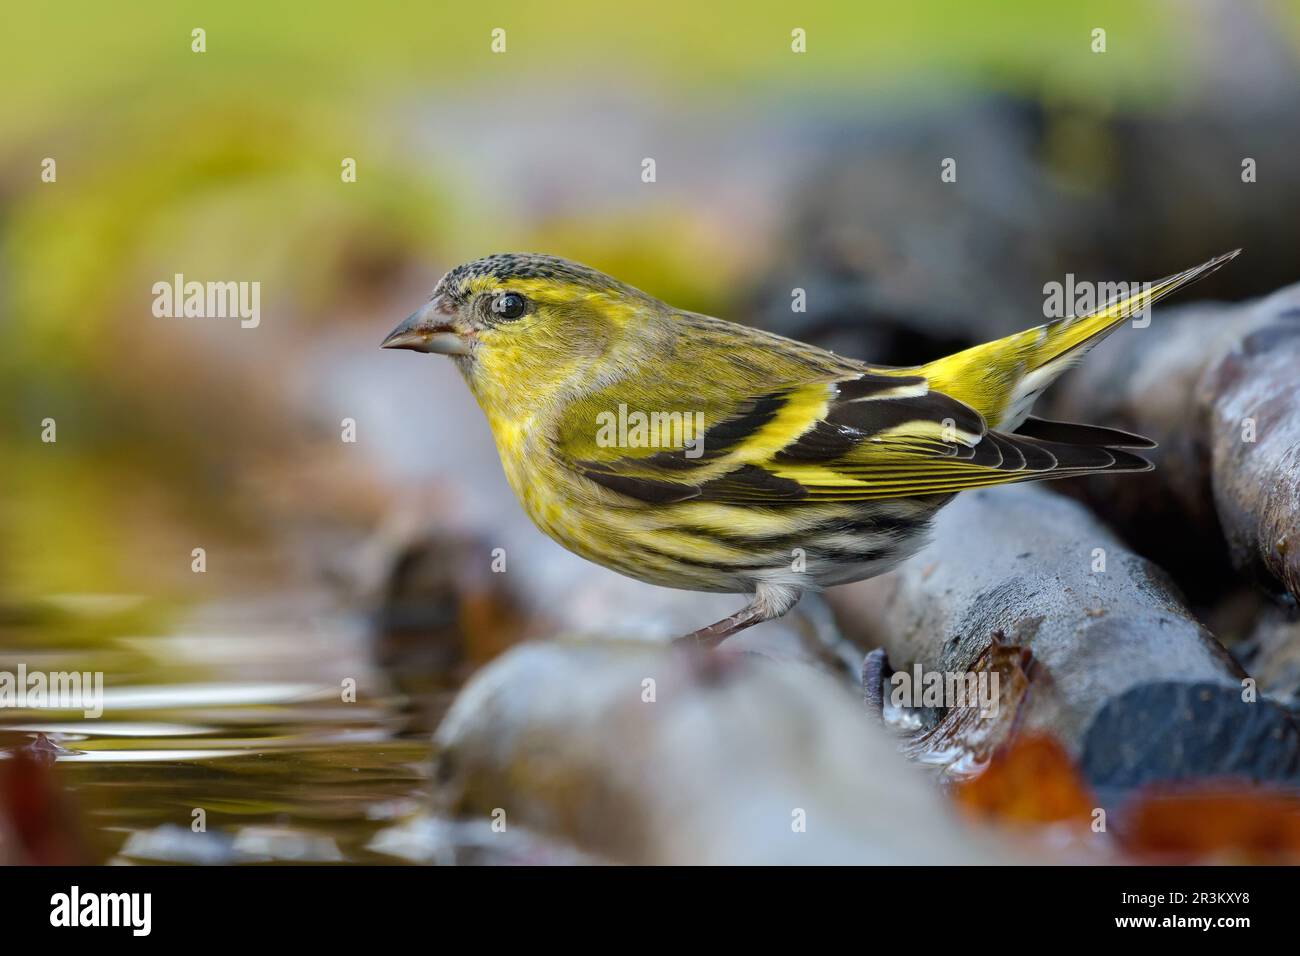 Adult male Eurasian Siskin (Spinus spinus) looking curiously sitting on branch in wet mossy place near water pond Stock Photo